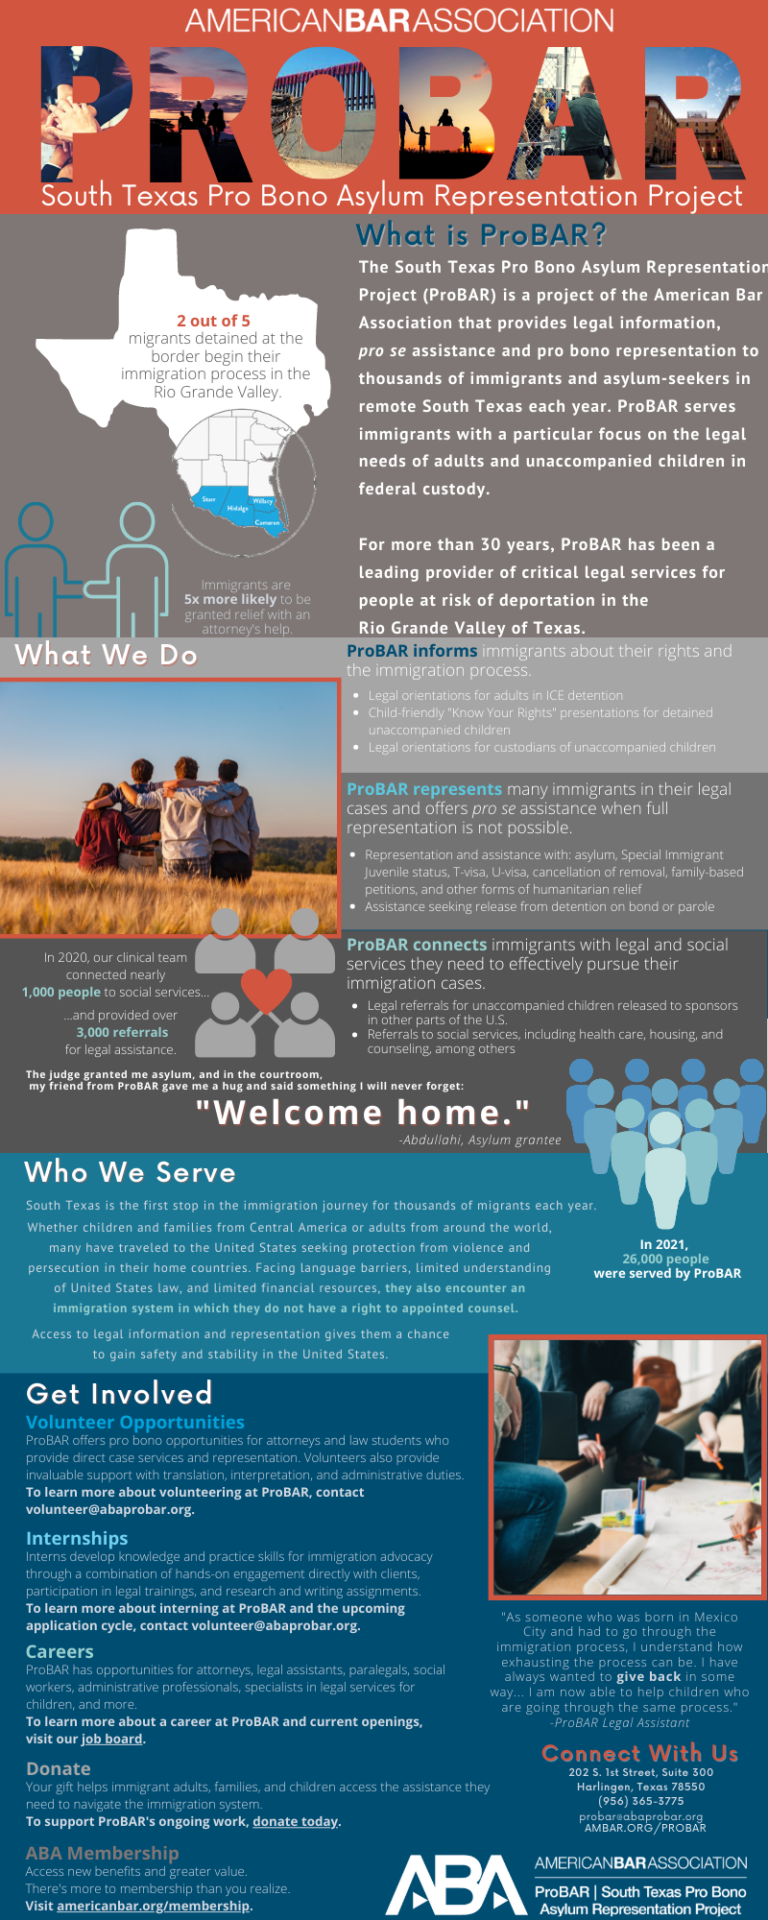 Infographic: American Bar Association PROBAR South Texas Pro Bono Asylum Representation Project 2 out of 5 migrants detained at the border begin their immigration process in the Rio Grande Valley. Immigrants are 5x more likely to be granted relief with an attorney's help. What is ProBAR? The South Texas Pro Bono Asylum Representation Project (ProBAR) is a project of the American Bar Association that provides legal information, pro se assistance and pro bono representation to thousands of immigrants and asylum-seekers in remote South Texas each year. ProBAR serves immigrants with a particular focus on the legal needs of adults and unaccompanied children in federal custody. For more than 30 years, ProBAR has been a leading provider of critical legal services for people at risk of deportation in the Rio Grande Valley of Texas. What We Do ProBAR informs immigrants about their rights and the immigration process. Legal orientations for adults in ICE detention Child-friendly "Know Your Rights" presentations for detained unaccompanied children Legal orientations for custodians of unaccompanied children ProBAR represents many immigrants in their legal cases and offers pro se assistance when full representation is not possible. Representation and assistance with: asylum, Special Immigrant Juvenile status, T-visa, U-visa, cancellation of removal, family-based petitions, and other forms of humanitarian relief Assistance seeking release from detention on bond or parole ProBAR connects immigrants with legal and social services they need to effectively pursue their immigration cases. Legal referrals for unaccompanied children released to sponsors in other parts of the U.S. Referrals to social services, including health care, housing, and counseling, among others In 2020, our clinical team connected nearly 1,000 people to social services... ...and provided over 3,000 referrals for legal assistance. The judge granted me asylum, and in the courtroom, my friend from ProBAR gave me a hug and said something I will never forget: "Welcome home." -Abdullahi, Asylum grantee Who We Serve South Texas is the first stop in the immigration journey for thousands of migrants each year. Whether children and families from Central America or adults from around the world, many have traveled to the United States seeking protection from violence and persecution in their home countries. Facing language barriers, limited understanding of United States law, and limited financial resources, they also encounter an immigration system in which they do not have a right to appointed counsel. Access to legal information and representation gives them a chance to gain safety and stability in the United States. In 2021, 26,000 people were served by ProBAR. Get Involved Volunteer Opportunities ProBAR offers pro bono opportunities for attorneys and law students who provide direct case services and representation. Volunteers also provide invaluable support with translation, interpretation, and administrative duties. To learn more about volunteering at ProBAR, contact volunteer@abaprobar.org. Internships Interns develop knowledge and practice skills for immigration advocacy through a combination of hands-on engagement directly with clients, participation in legal trainings, and research and writing assignments. To learn more about interning at ProBAR and the upcoming application cycle, contact volunteer@abaprobar.org. Careers ProBAR has opportunities for attorneys, legal assistants, paralegals, social workers, administrative professionals, specialists in legal services for children, and more. To learn more about a career at ProBAR and current openings, visit our job board. Donate Your gift helps immigrant adults, families, and children access the assistance they need to navigate the immigration system. To support ProBAR's ongoing work, donate today. ABA Membership Access new benefits and greater value. There's more to membership than you realize. Visit americanbar.org/membership. "As someone who was born in Mexico City and had to go through the immigration process, I understand how exhausting the process can be. I have always wanted to give back in some way... I am now able to help children who are going through the same process." -ProBAR Legal Assistant Connect With Us 202 S. 1st Street, Suite 300 Harlingen, Texas 78550 (956) 365-3775 probar@abaprobar.org ambar.org/probar ProBAR logo